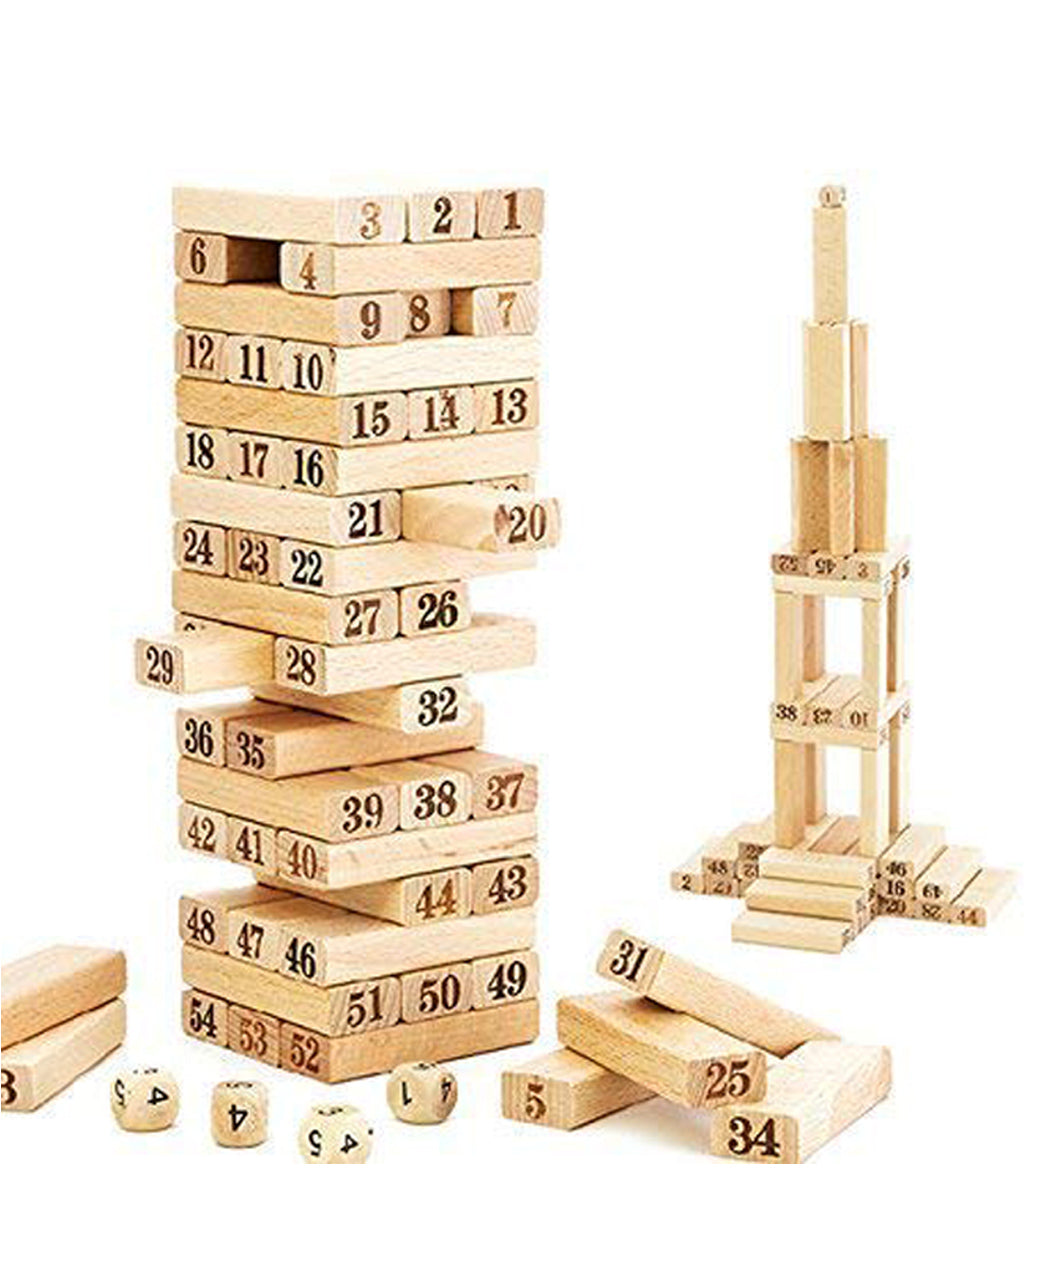 4 Dices Wooden Numbered Building Bricks Stacking Set - 54 Pieces